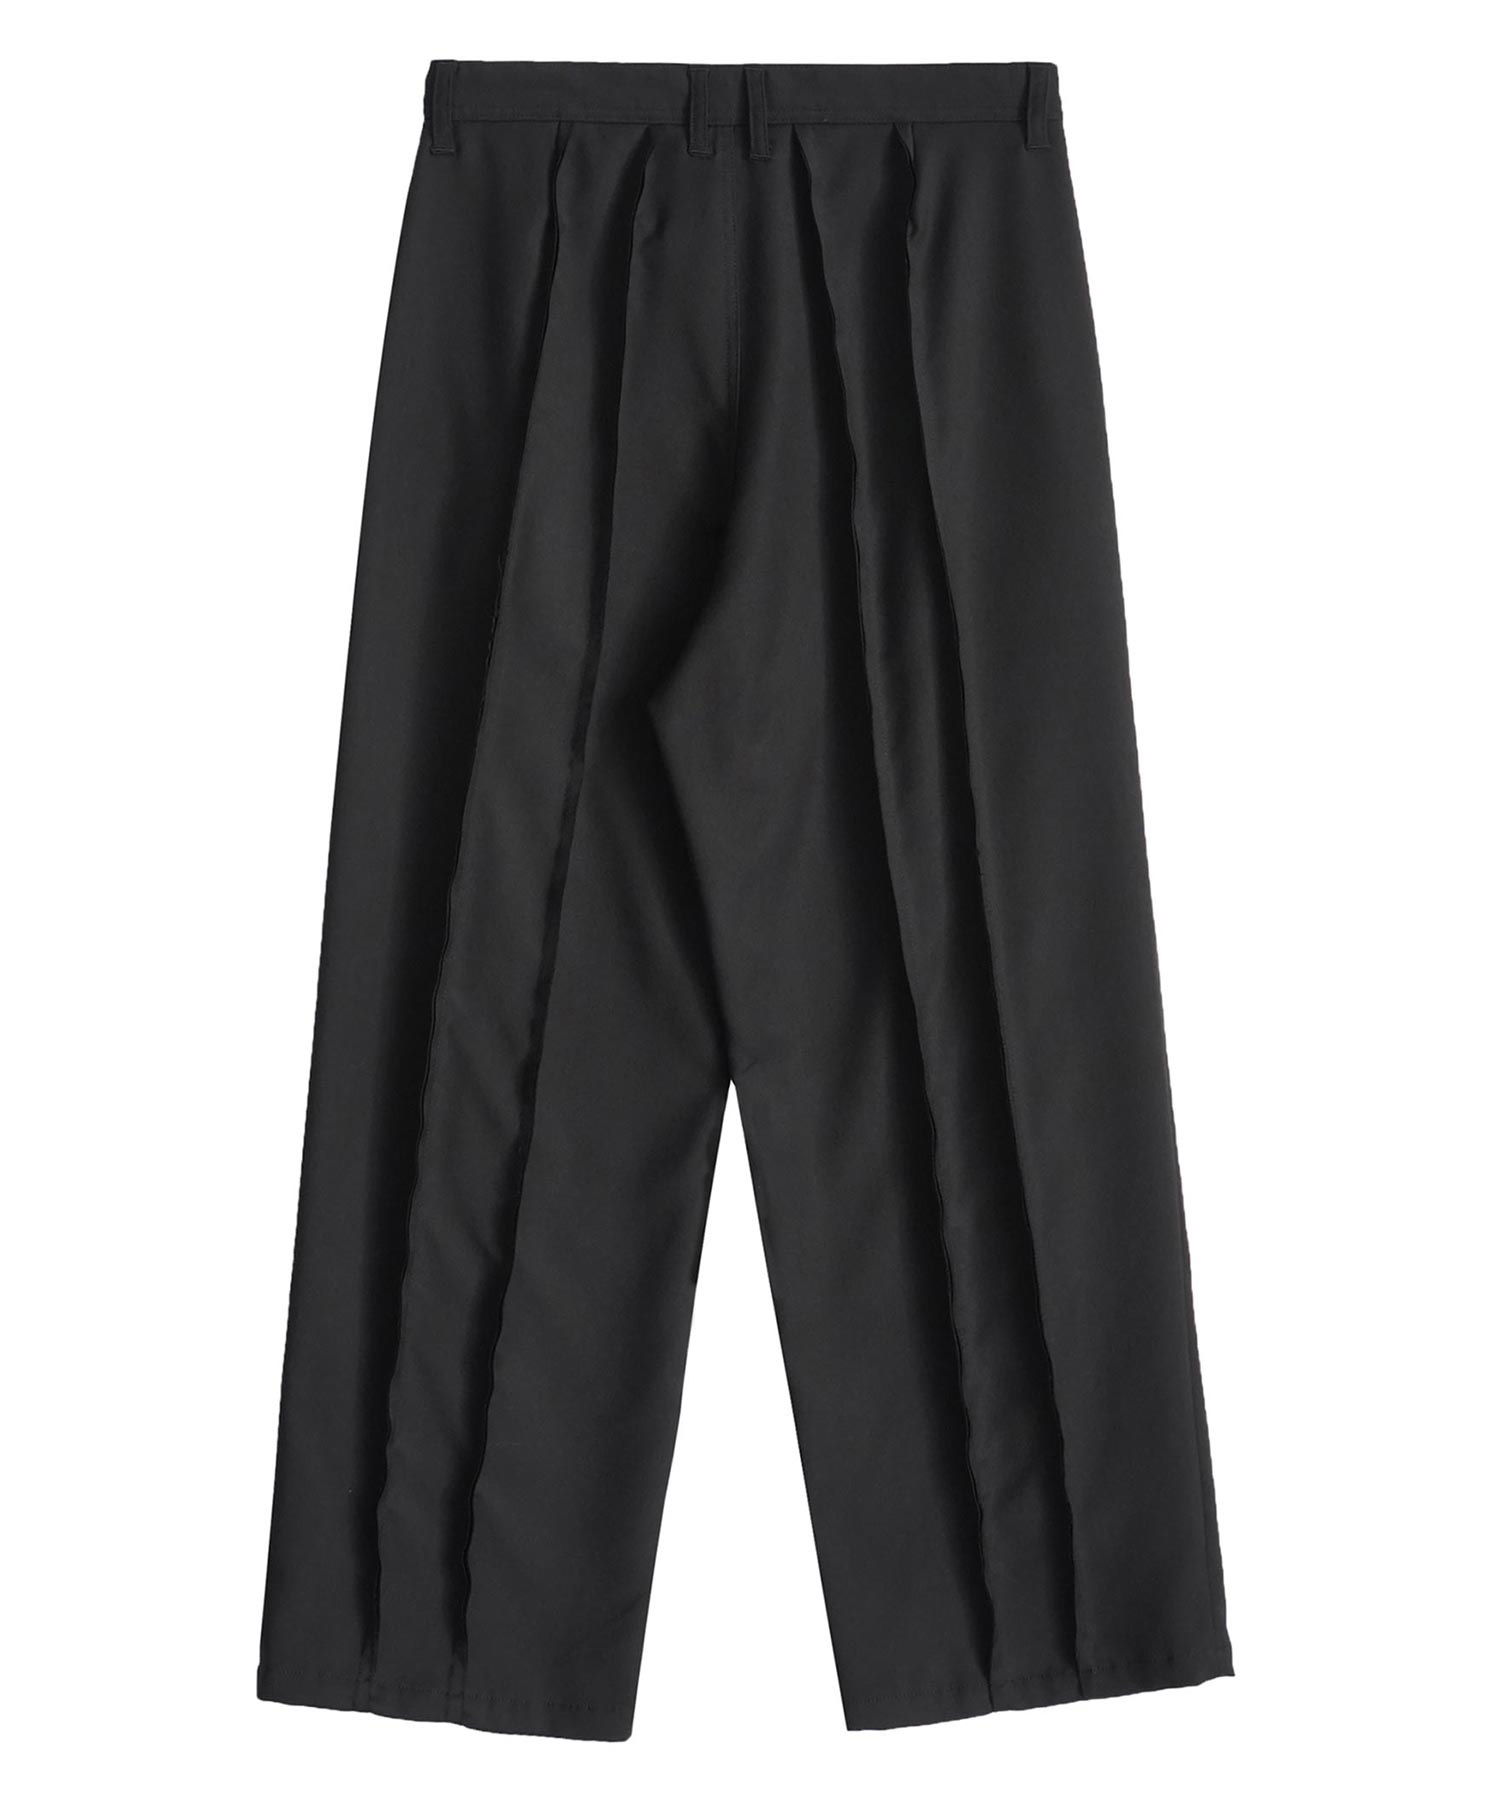 SHAREEF ONLINE SHOP / DOUBLE CLOTH WIDE PANTS